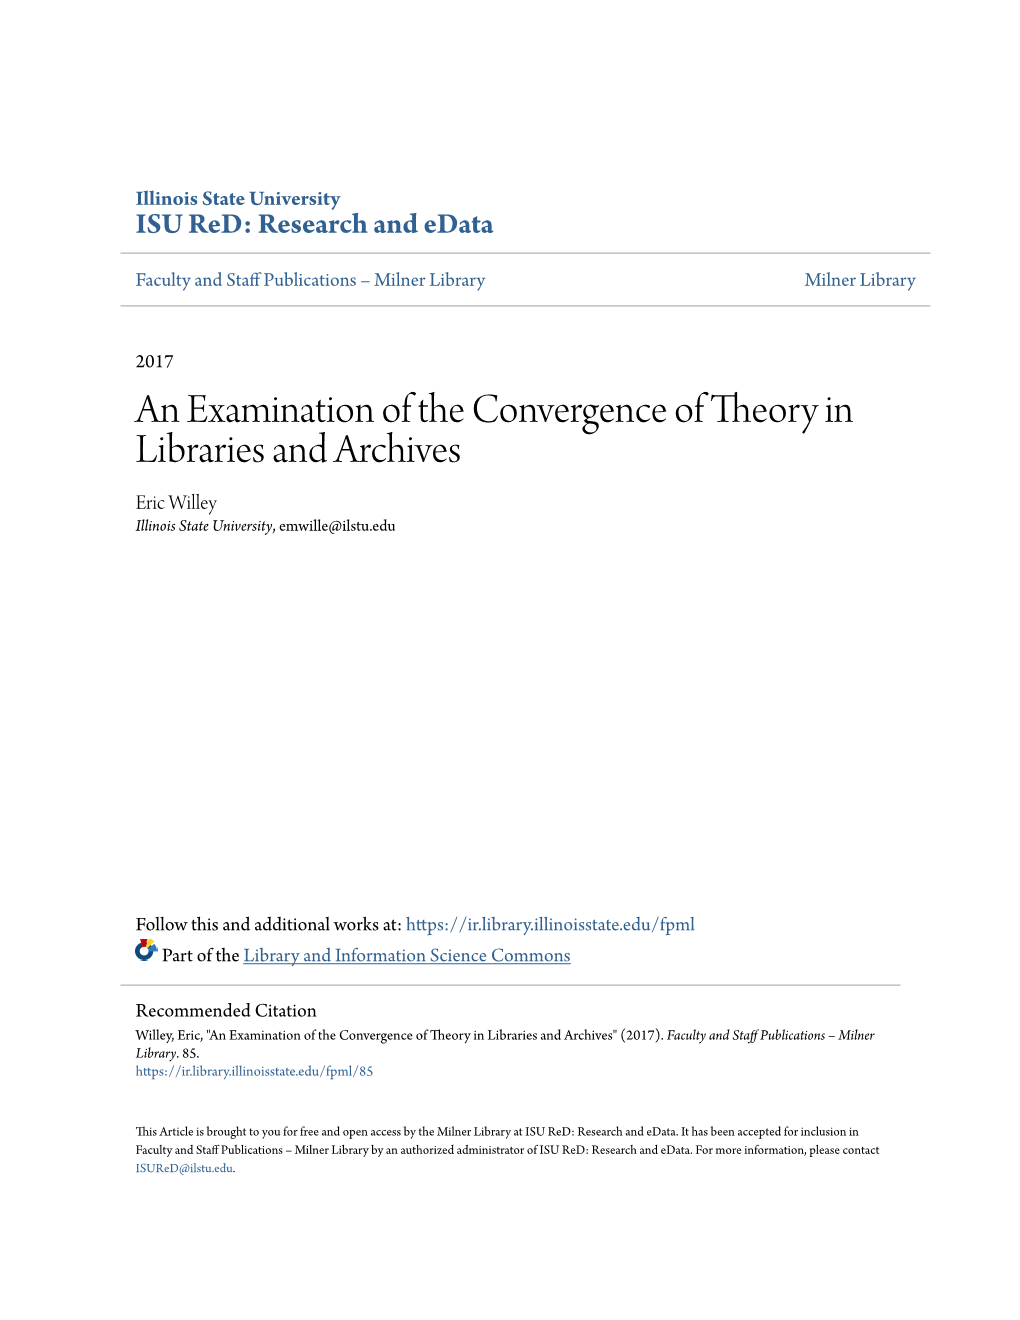 An Examination of the Convergence of Theory in Libraries and Archives Eric Willey Illinois State University, Emwille@Ilstu.Edu